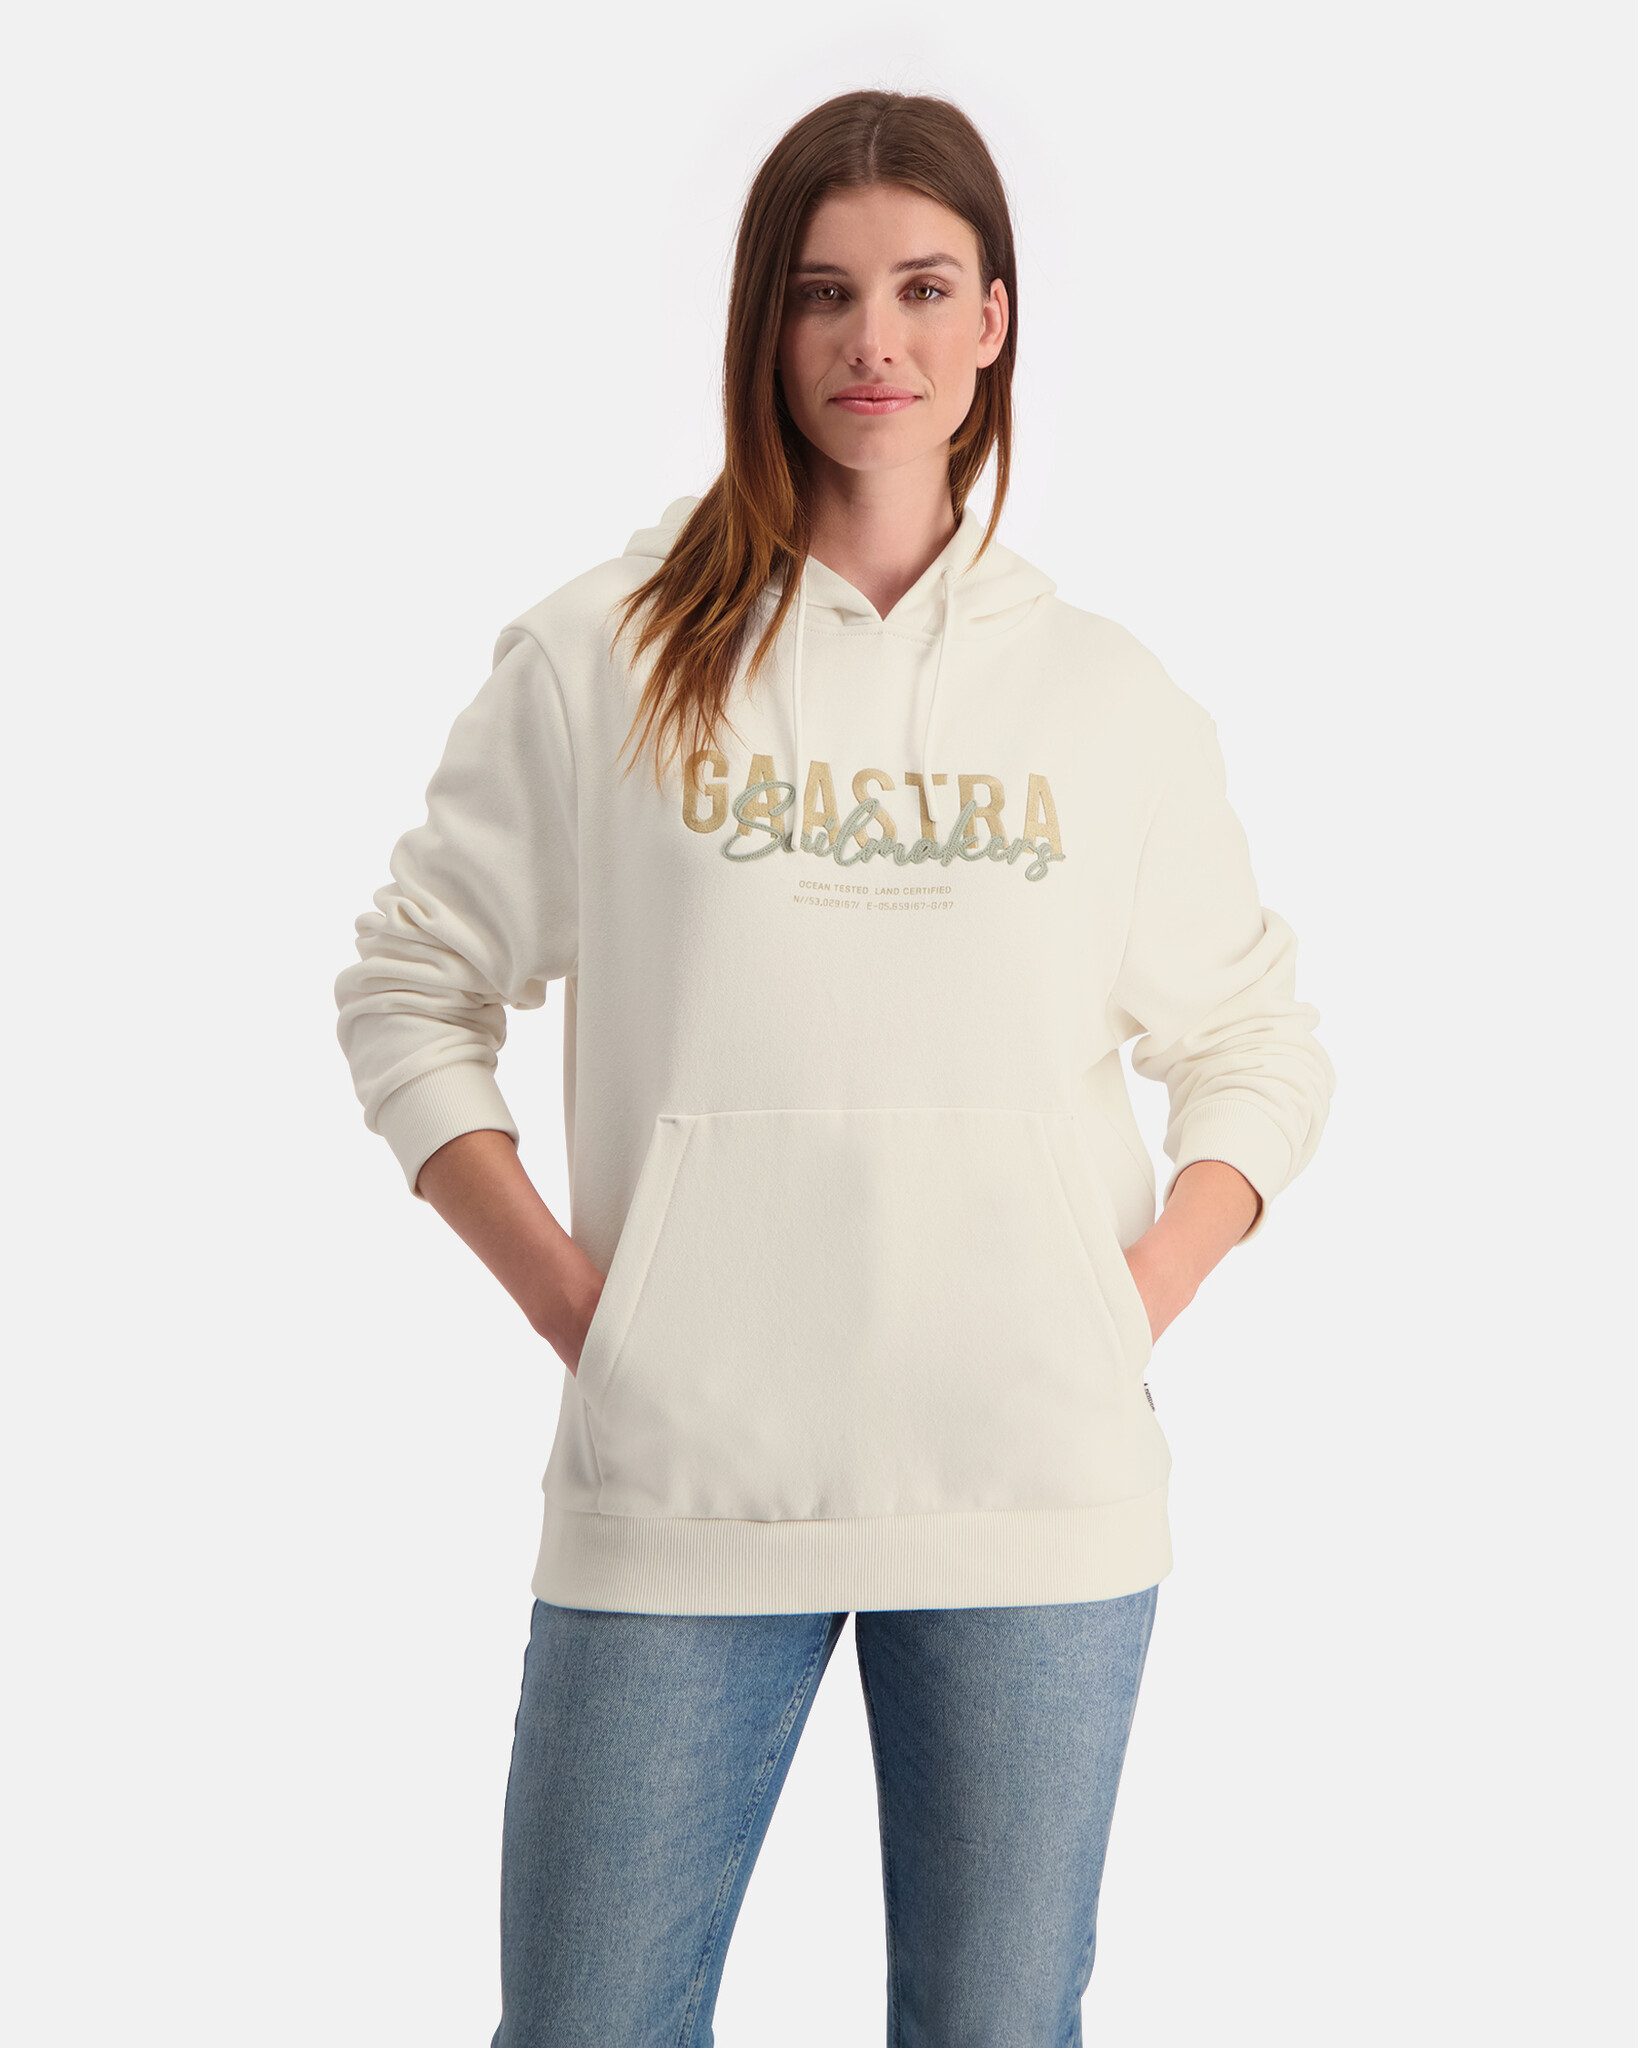 Hooded sweater with embroidered Gaastra logo and Sailmaker patch work